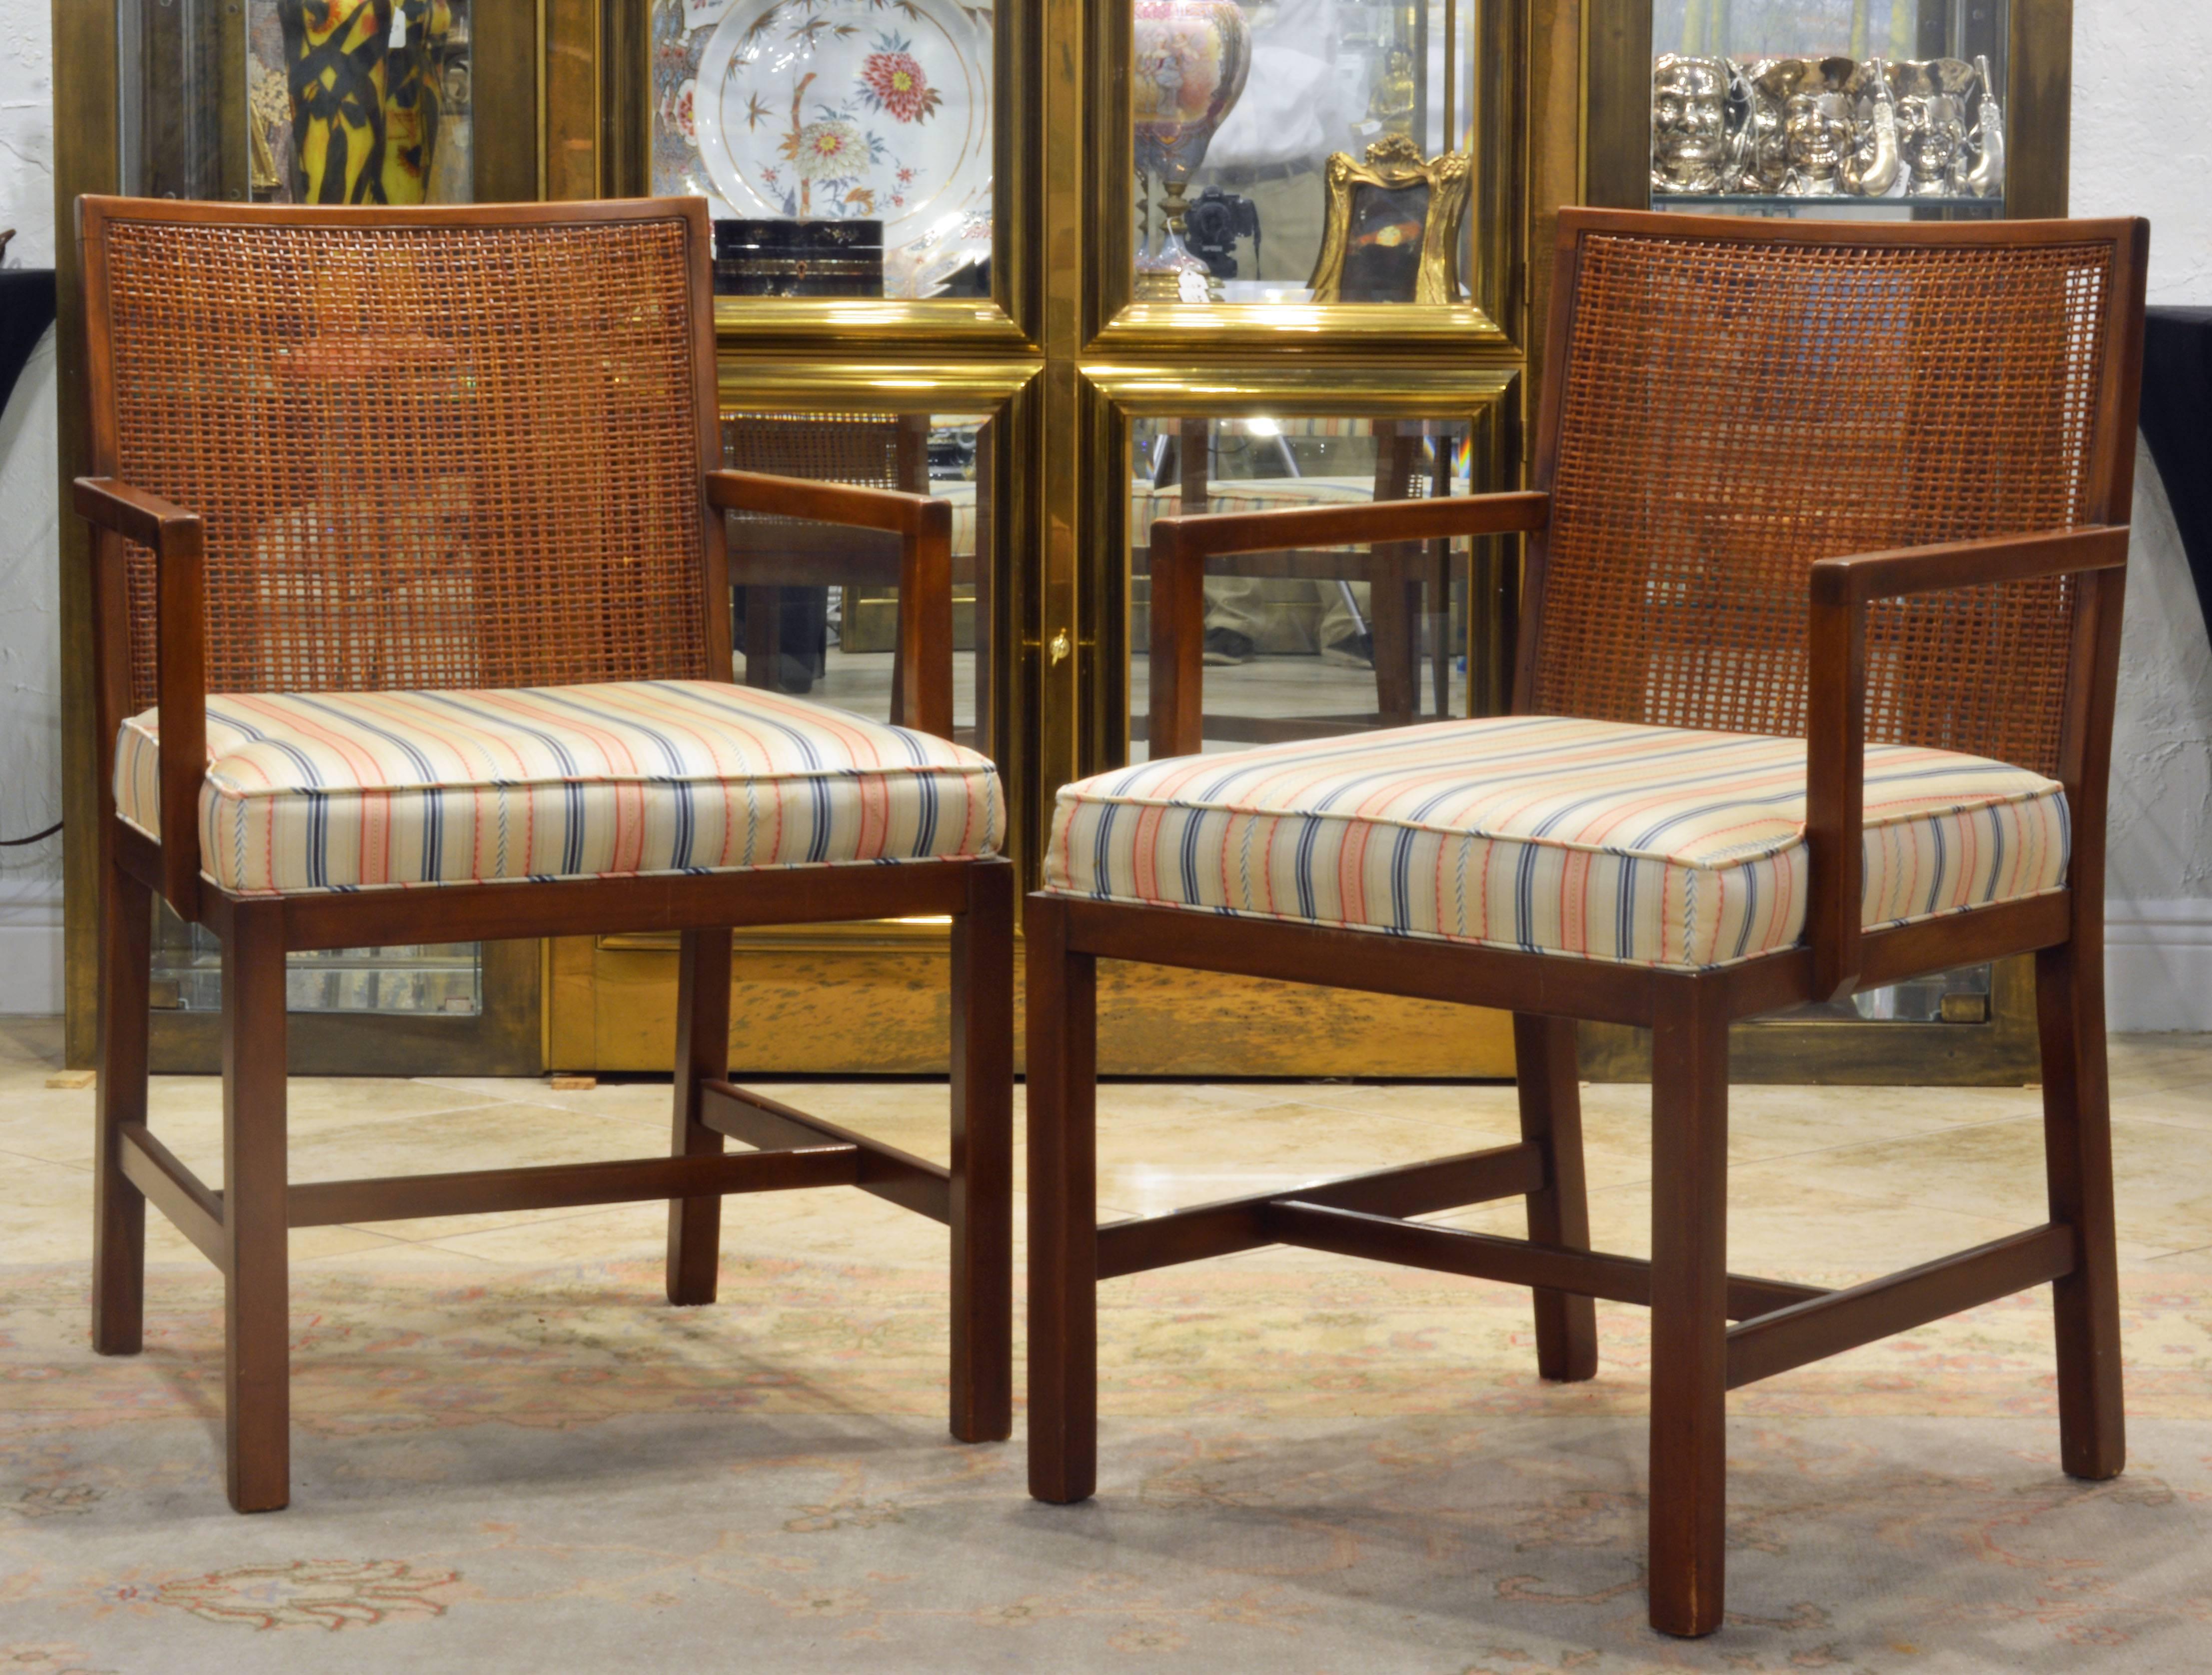 These Mid-Century Modern chairs feature elegant design and classic modern form that will always be synonymous with good taste. The combination of a sturdy but minimalist frames, cane backs and upholstered seats is very comfortable. The measurements